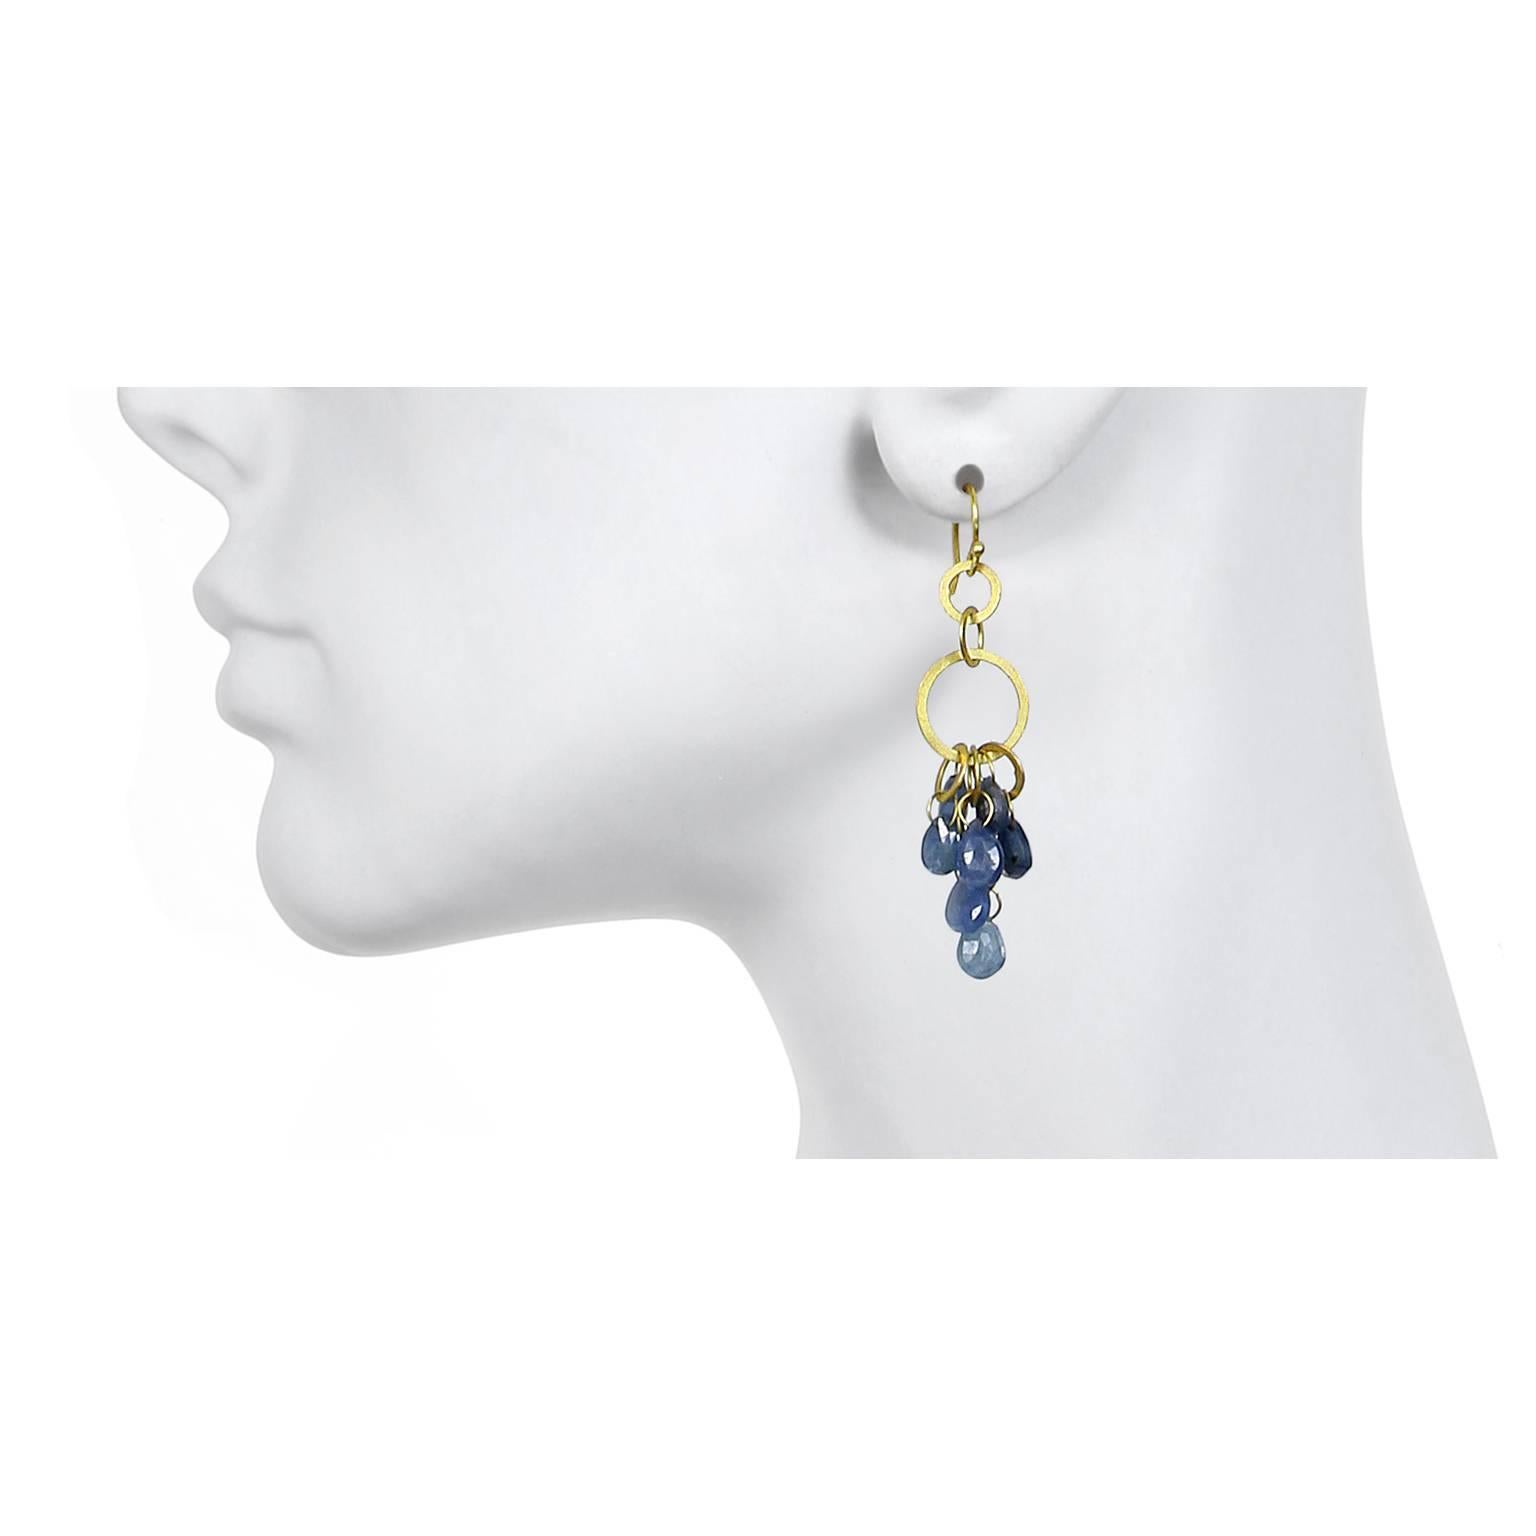 Handcrafted in signature 18k green* gold, this multi-loop, umba blue sapphire earrings feature planished gold circles giving texture and dimension.  Super lightweight with just the right amount of swing.  Pair these with your favorite shift dress